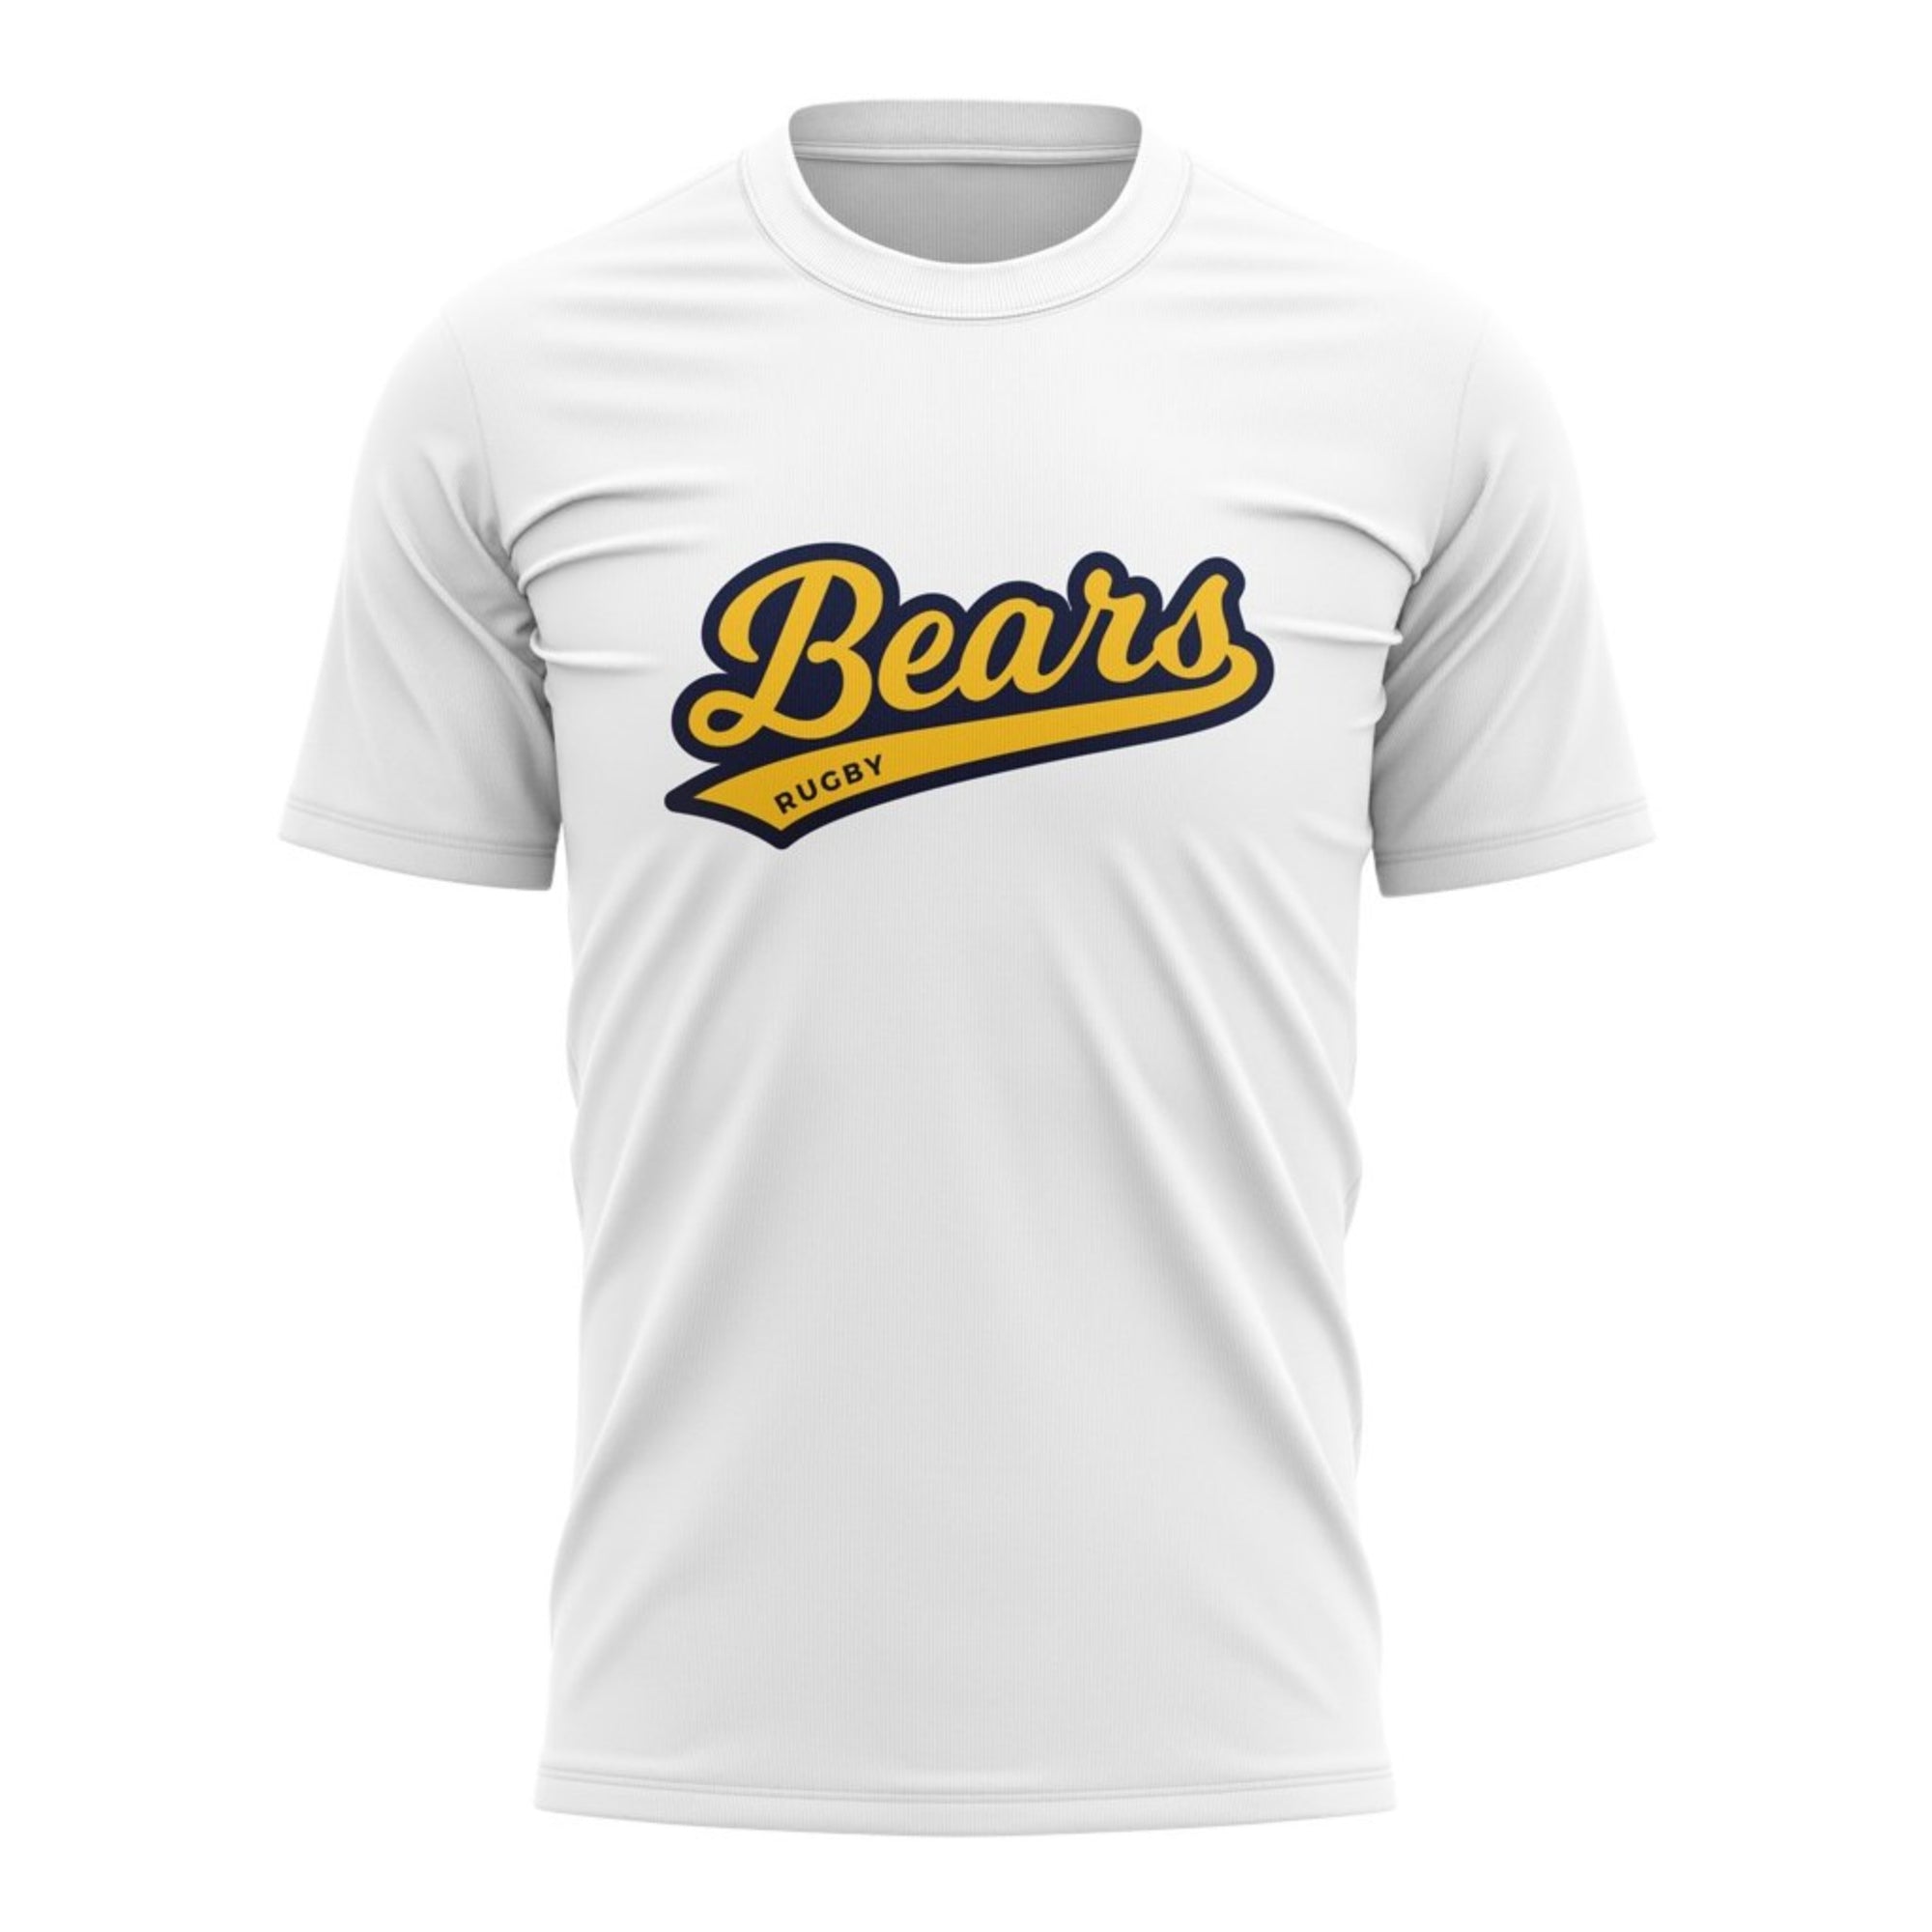 BC Rugby 2021 "Bears" Tee - Youth White/Gold - www.therugbyshop.com www.therugbyshop.com YOUTH / WHITE / XS XIX Brands TEES BC Rugby 2021 "Bears" Tee - Youth White/Gold